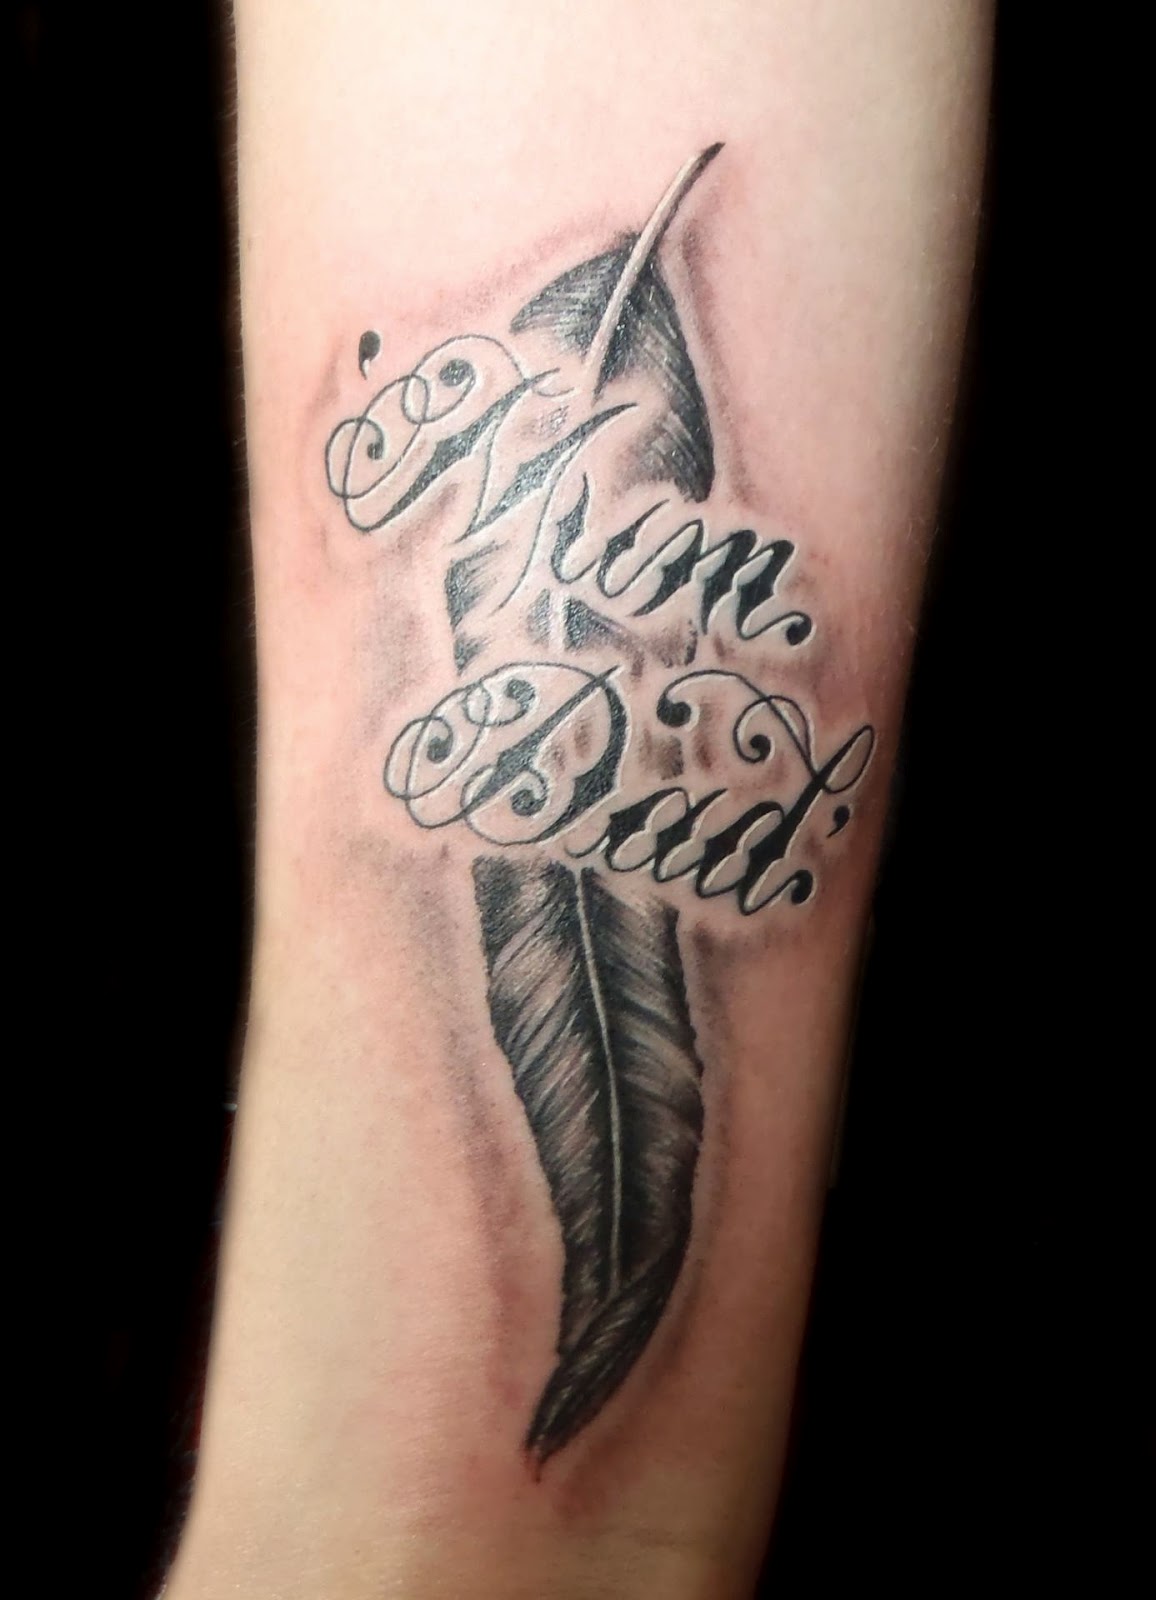 Amazing Feather Mom And Dad Tattoo On Arm - Mom And Dad Tattoo Designs For Wrists - HD Wallpaper 